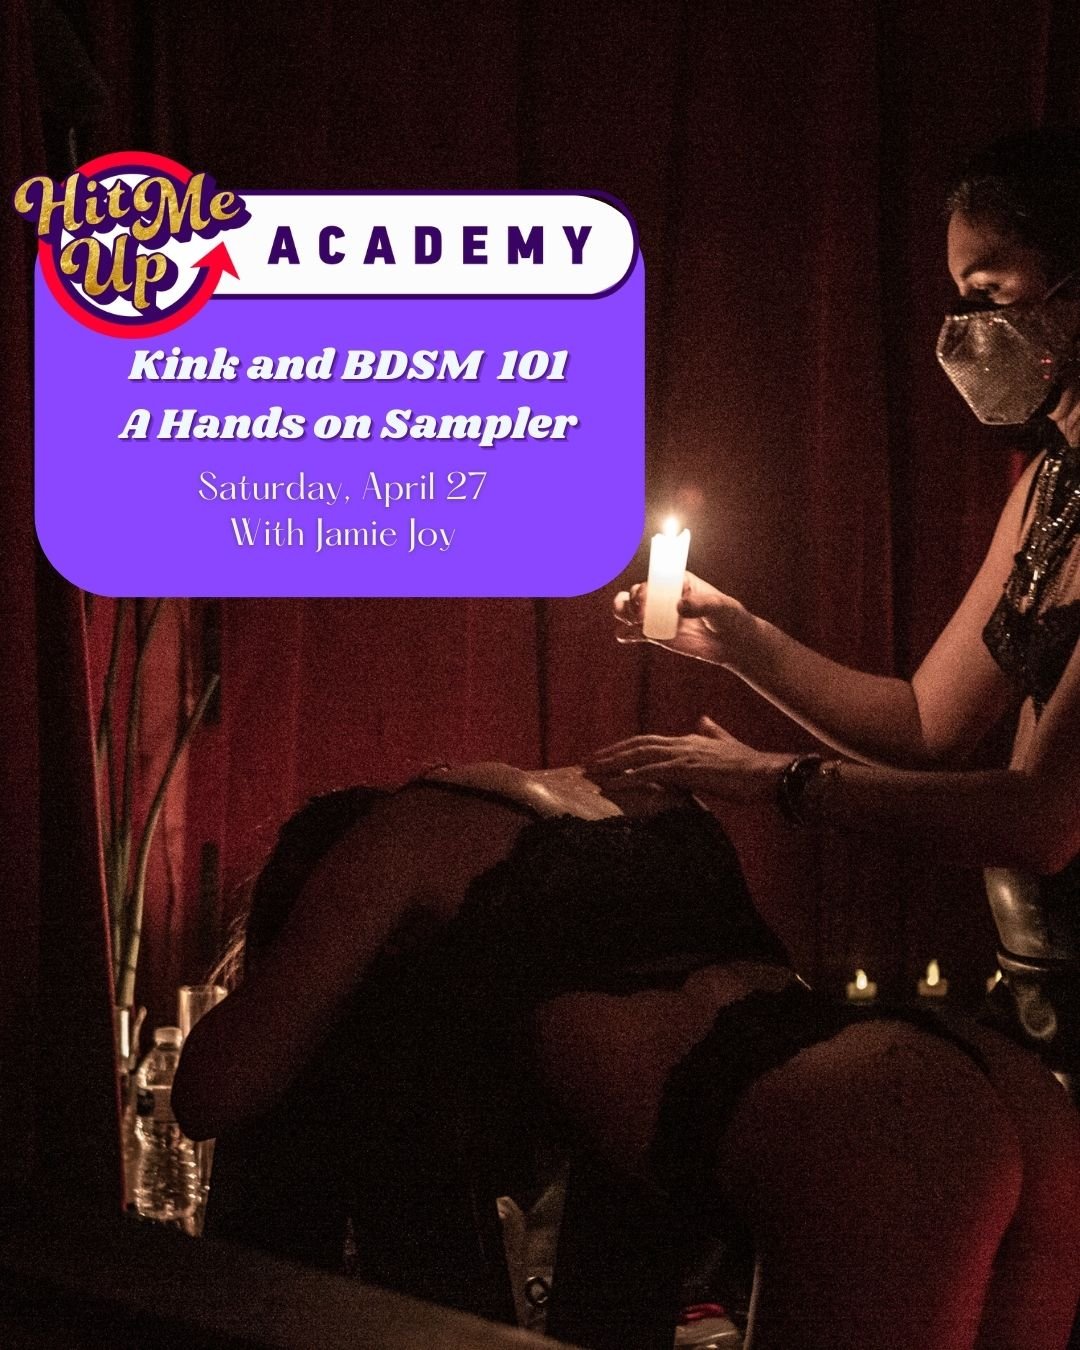 Join certified sǝx educator Jamie Joy (@badjewboy) for an interactive class on k!nk and BDeeSM for the brave and bold! Whether you are just beginning to dabble or ready to live the lifestyle, this space is for you. Topics will include: vocabulary, fi